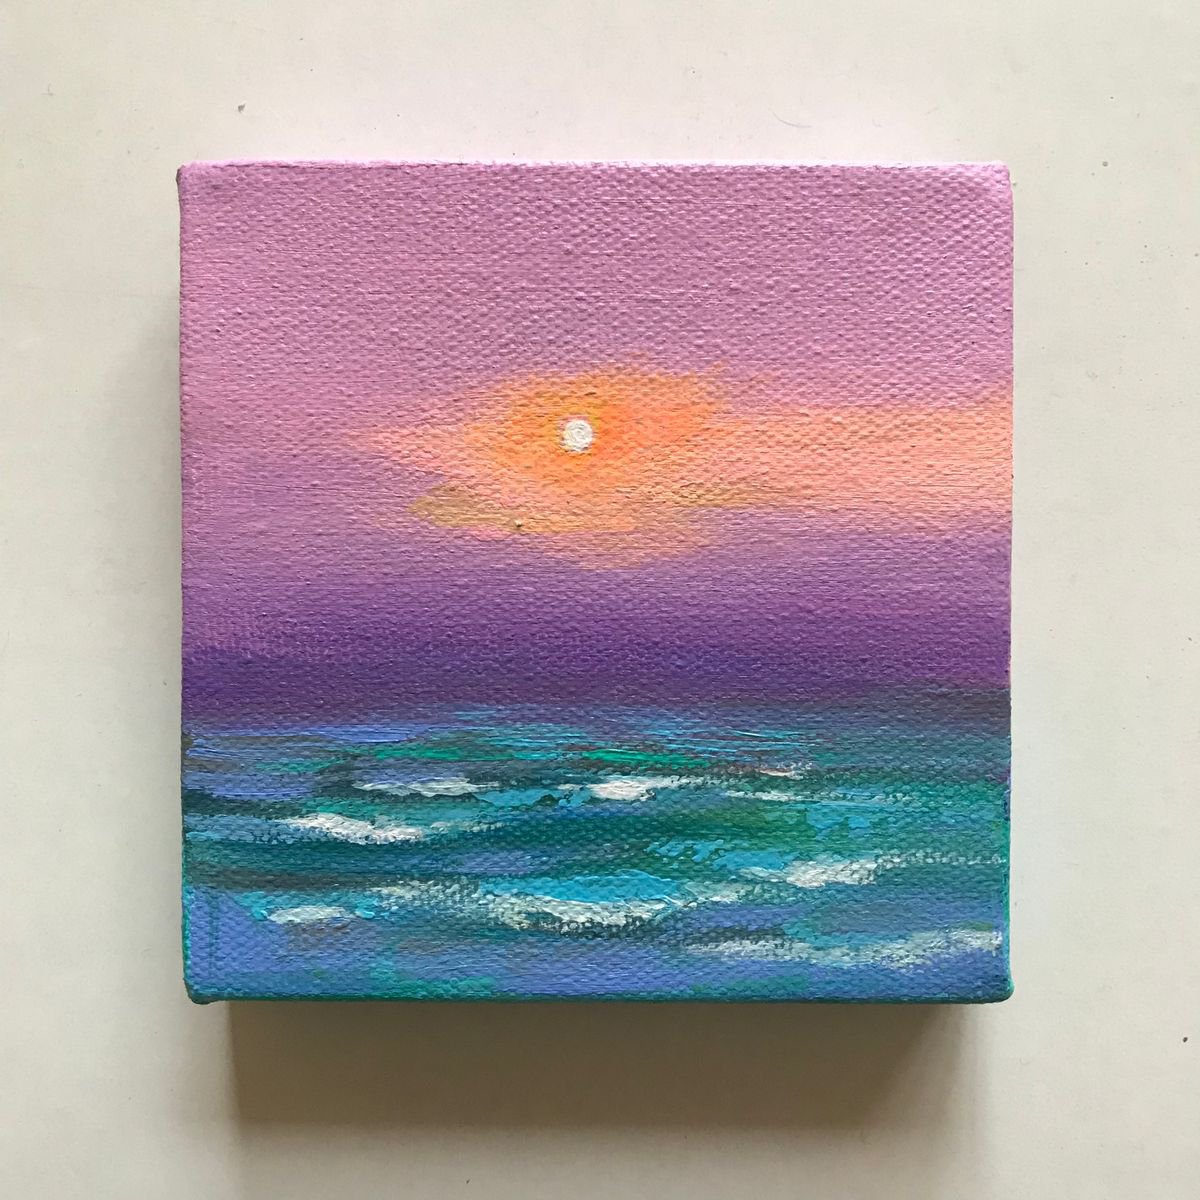 Sunset at the Beach! Miniature abstract landscape! Ready to hang by Amita Dand